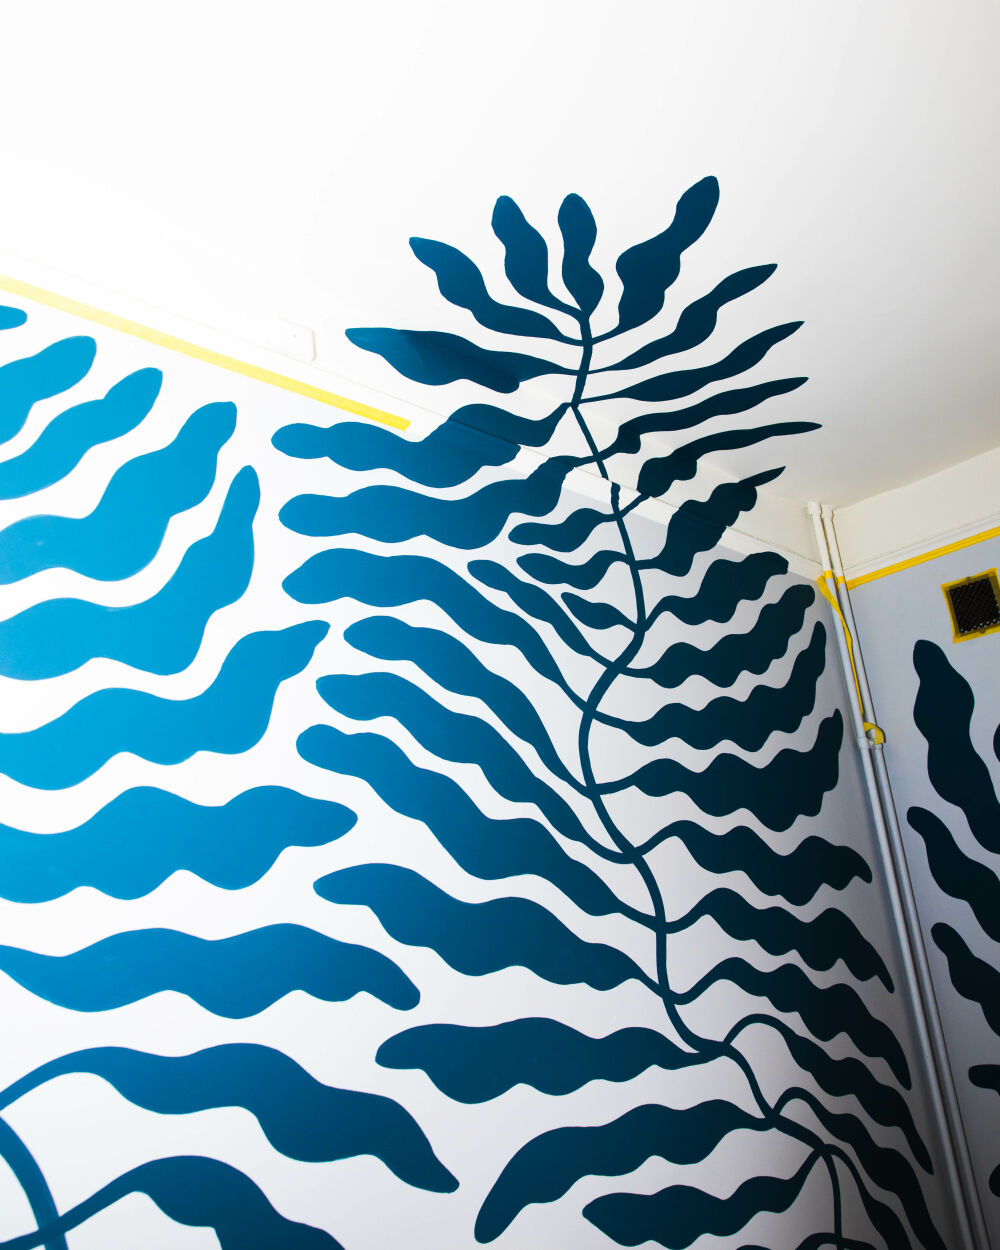 Wall decorations, public art handpainted by Linnéa Andersson